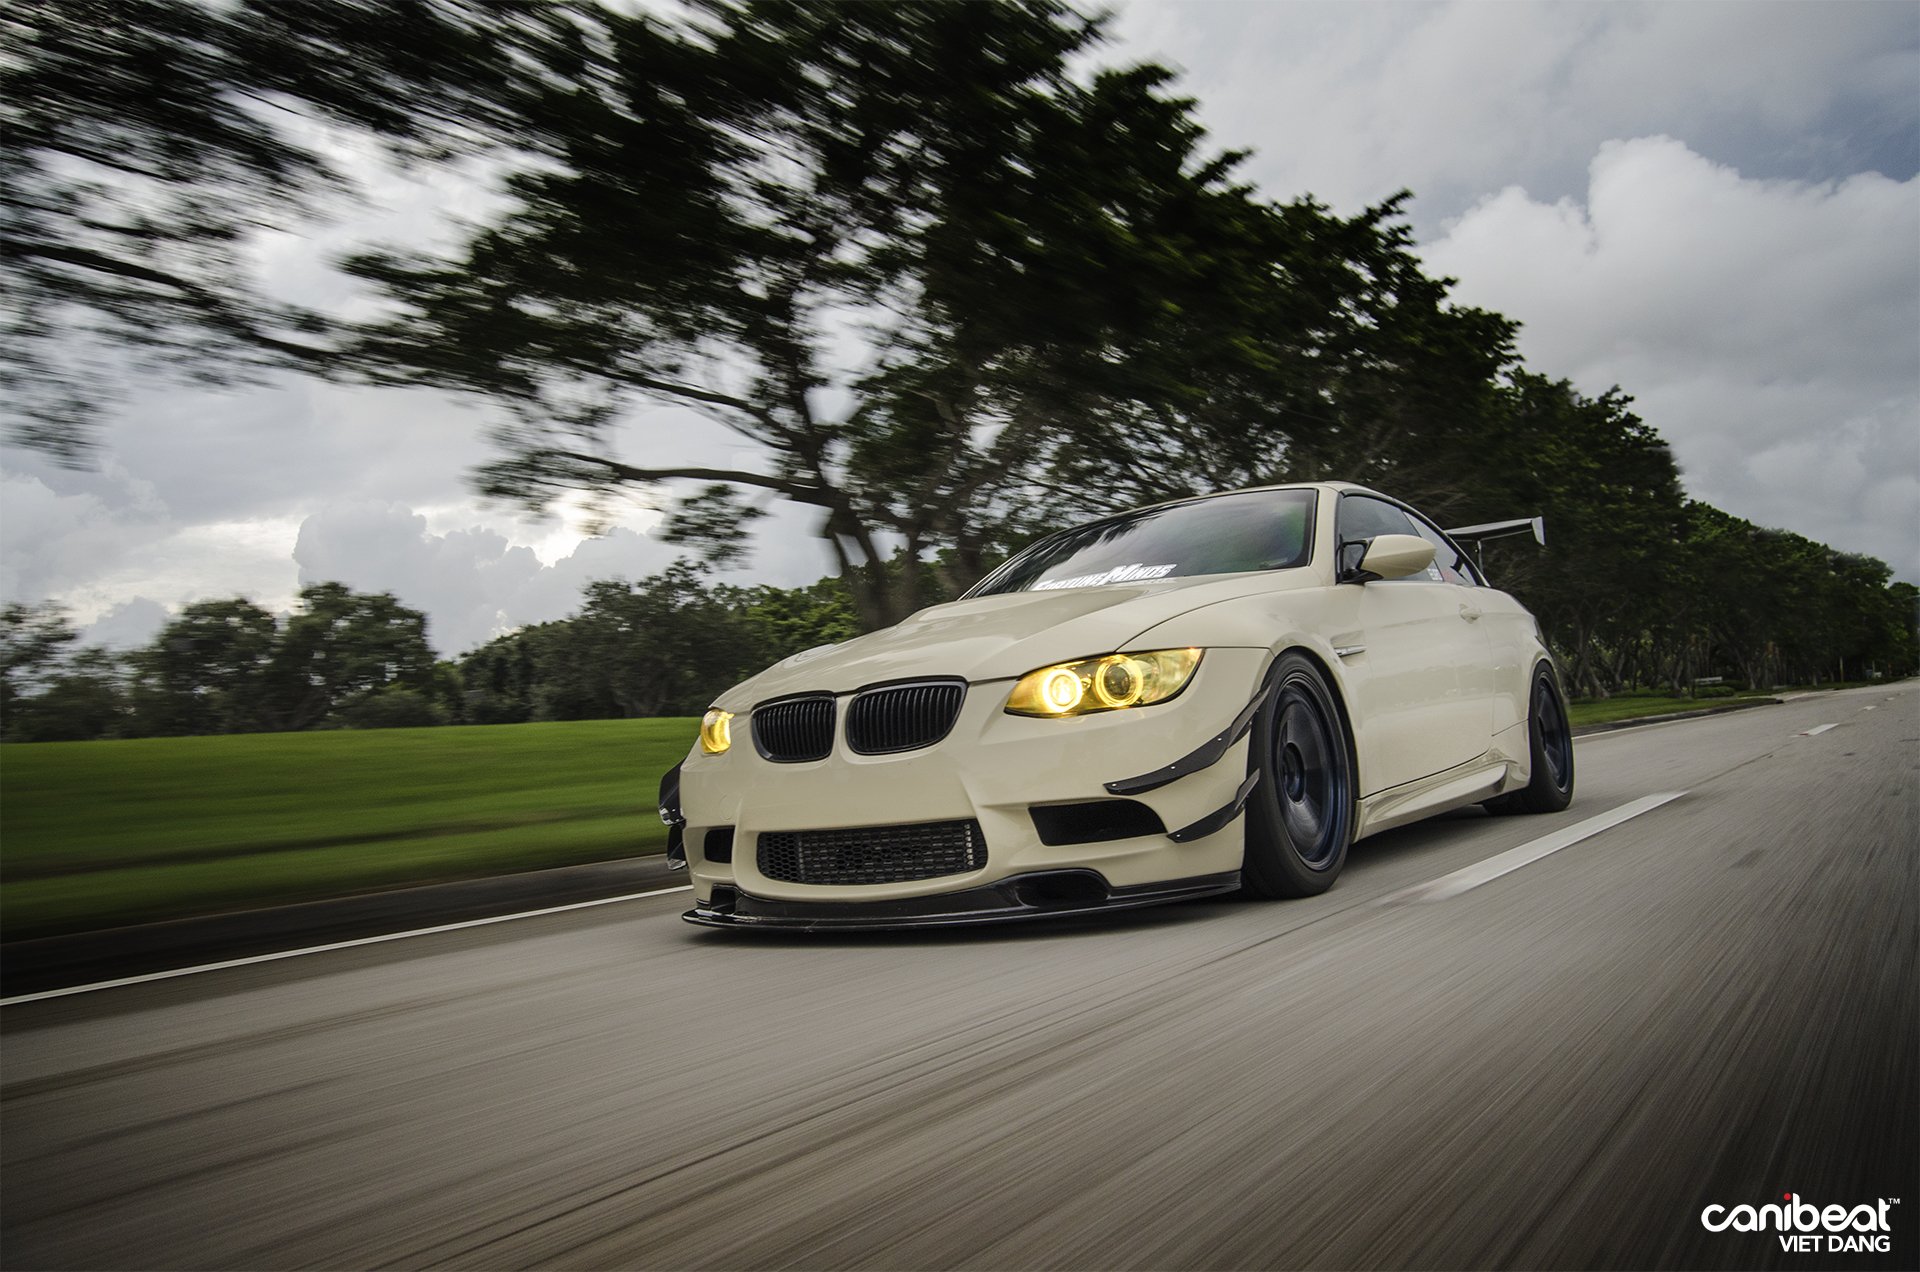 2008, Bmw, 335i, Tuning, Custom Wallpapers HD / Desktop and Mobile